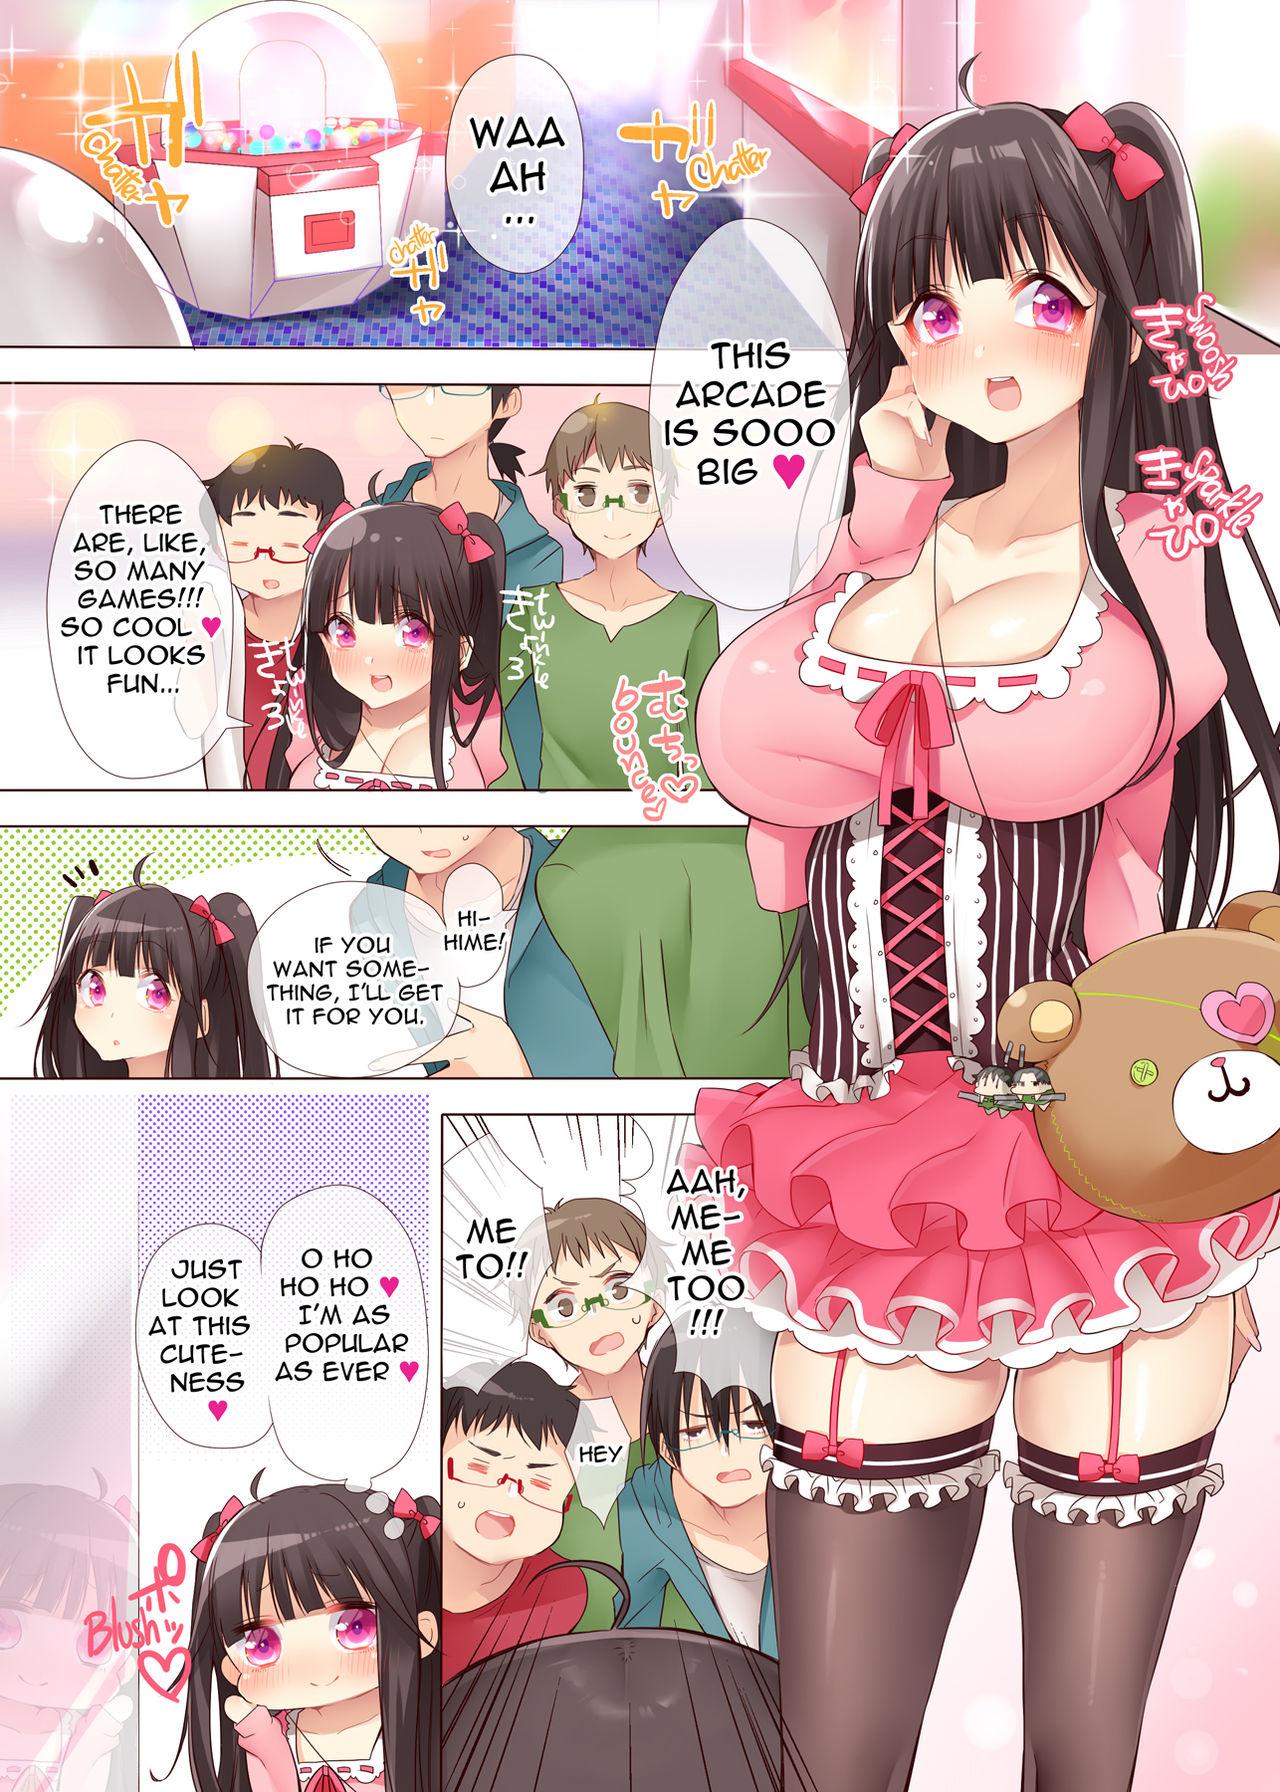 Male The Princess of an Otaku Group Got Knocked Up by Some Piece of Trash So She Let an Otaku Guy Do Her Too!? Gay Tattoos - Page 2